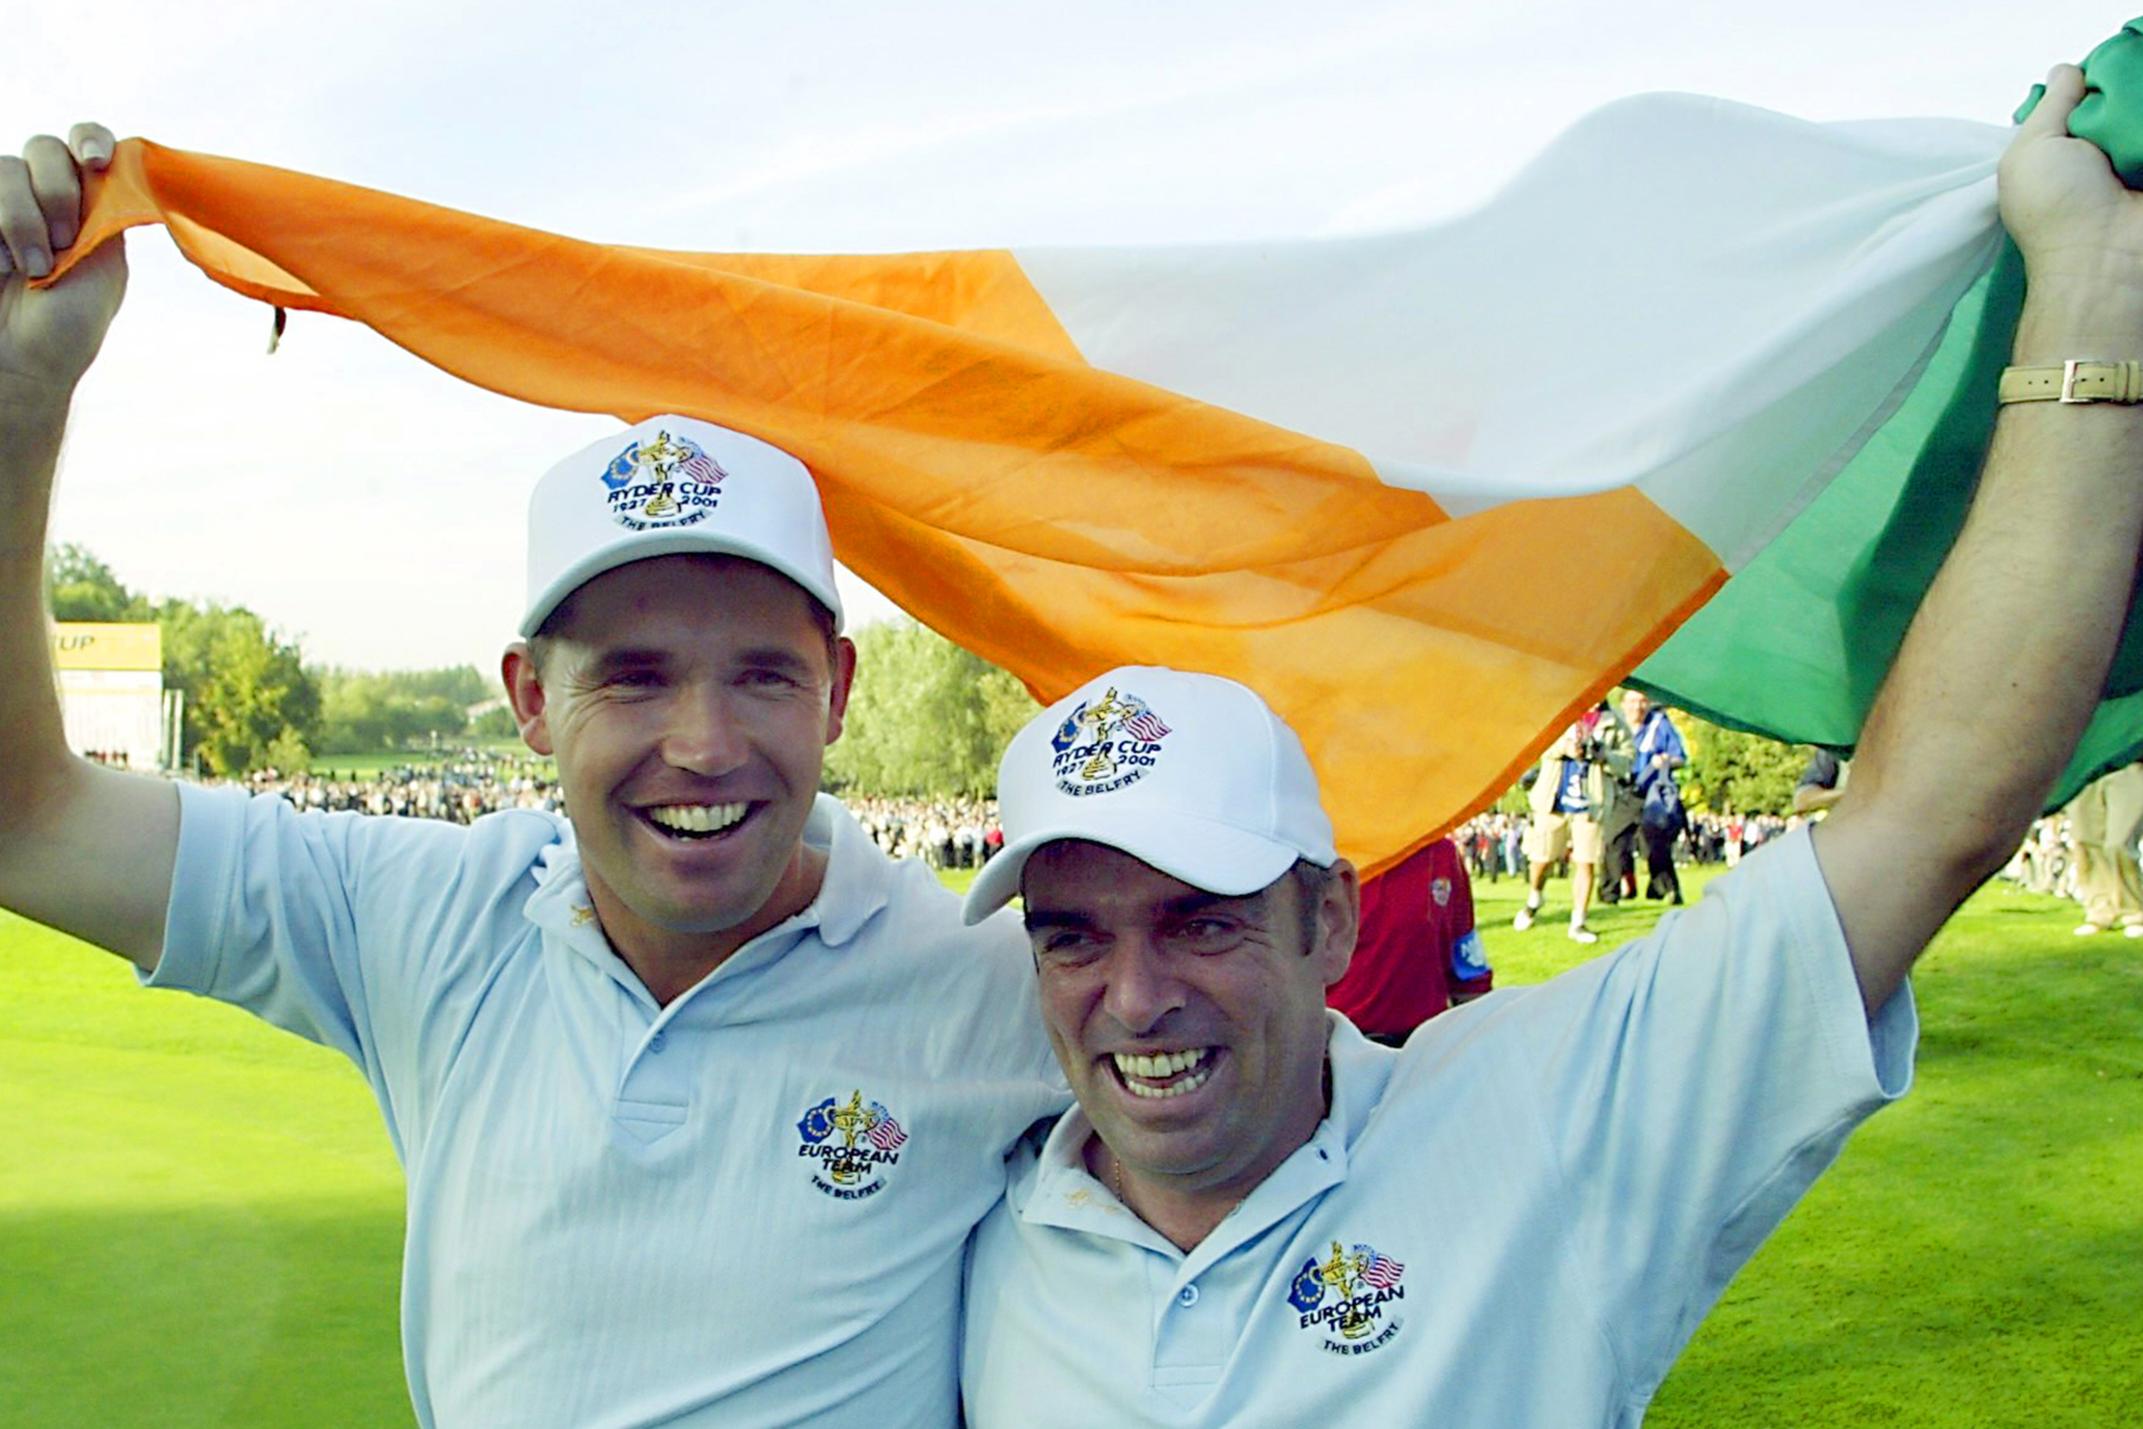 Ryder Cup 2026: All you need to know about Adare Manor, Ireland